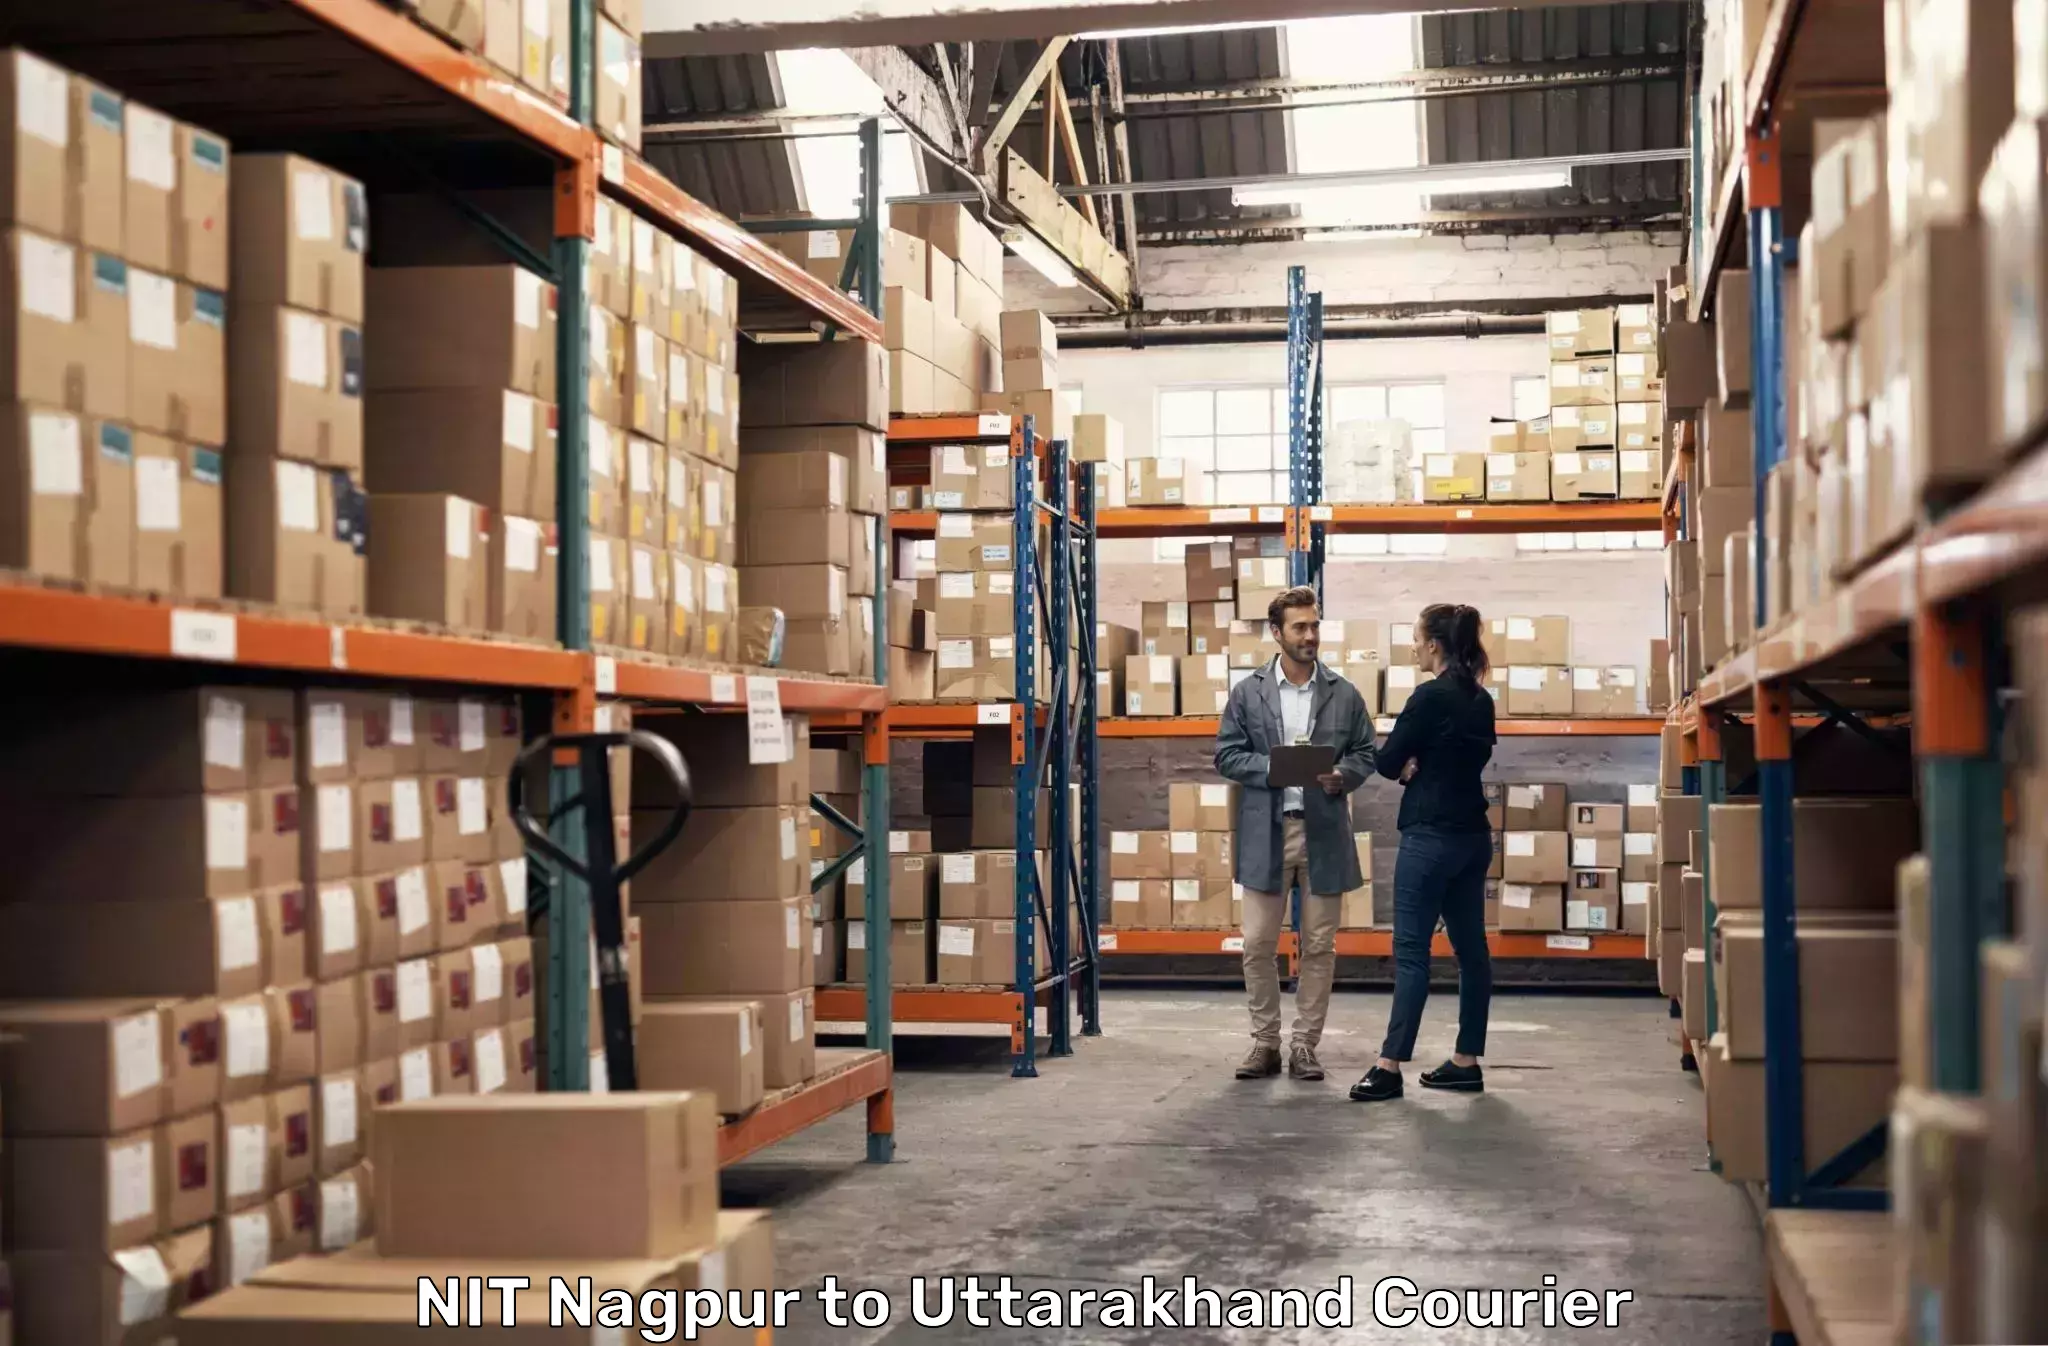 Nationwide courier service NIT Nagpur to Rudrapur